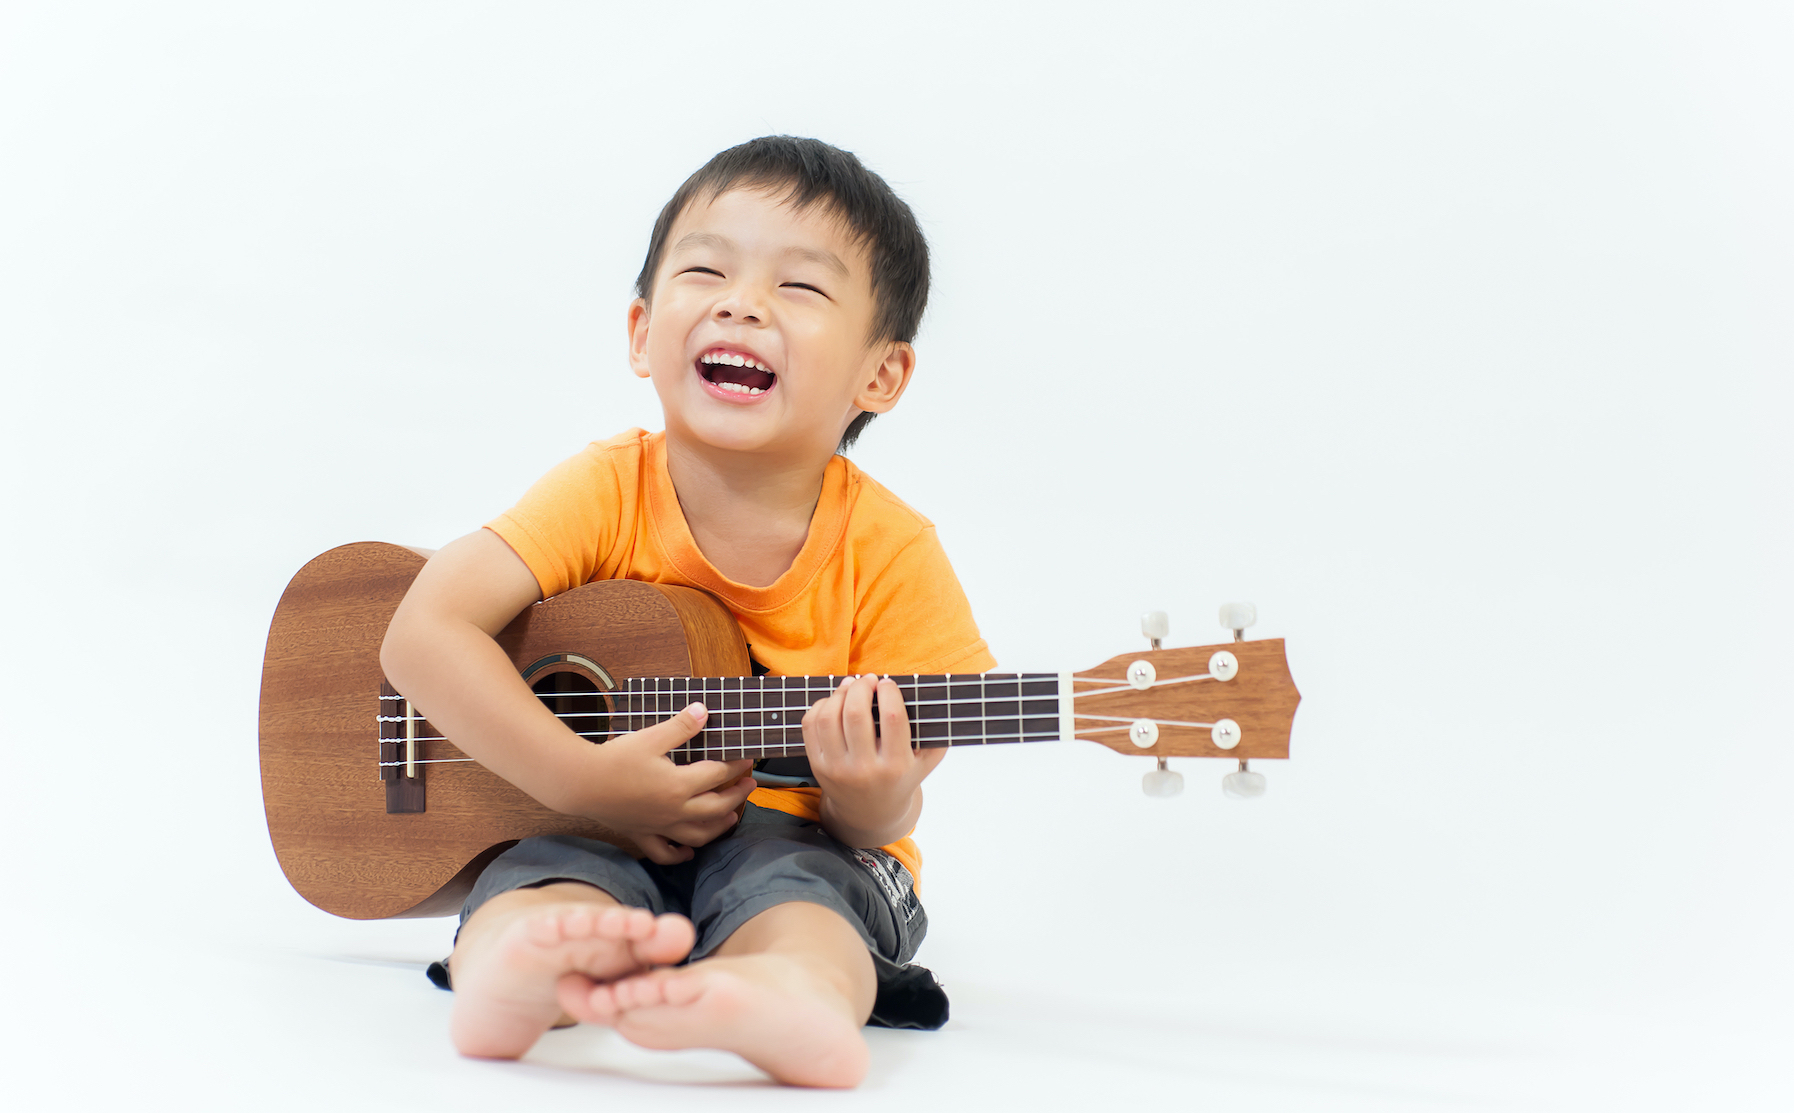 Toddler Music Lessons Aren’t the Best Idea